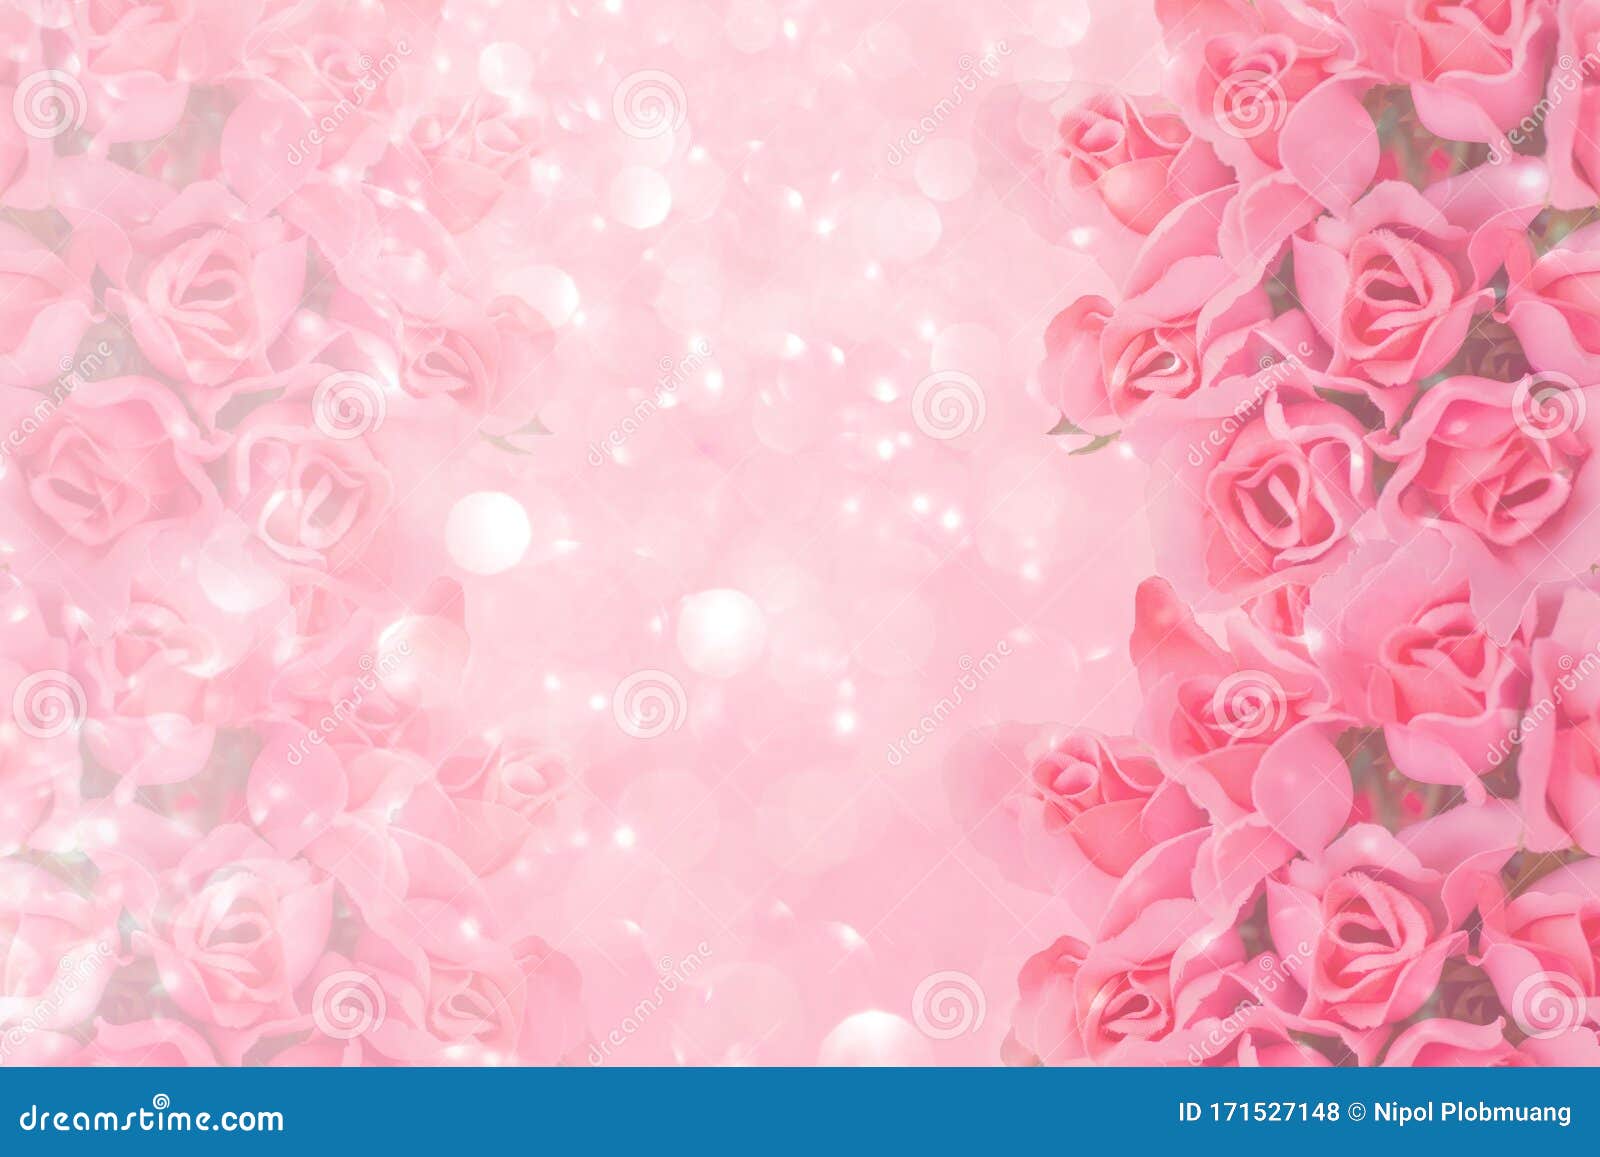 Pink Rose with Pink Shiny Glitter Background. Stock Photo - Image ...